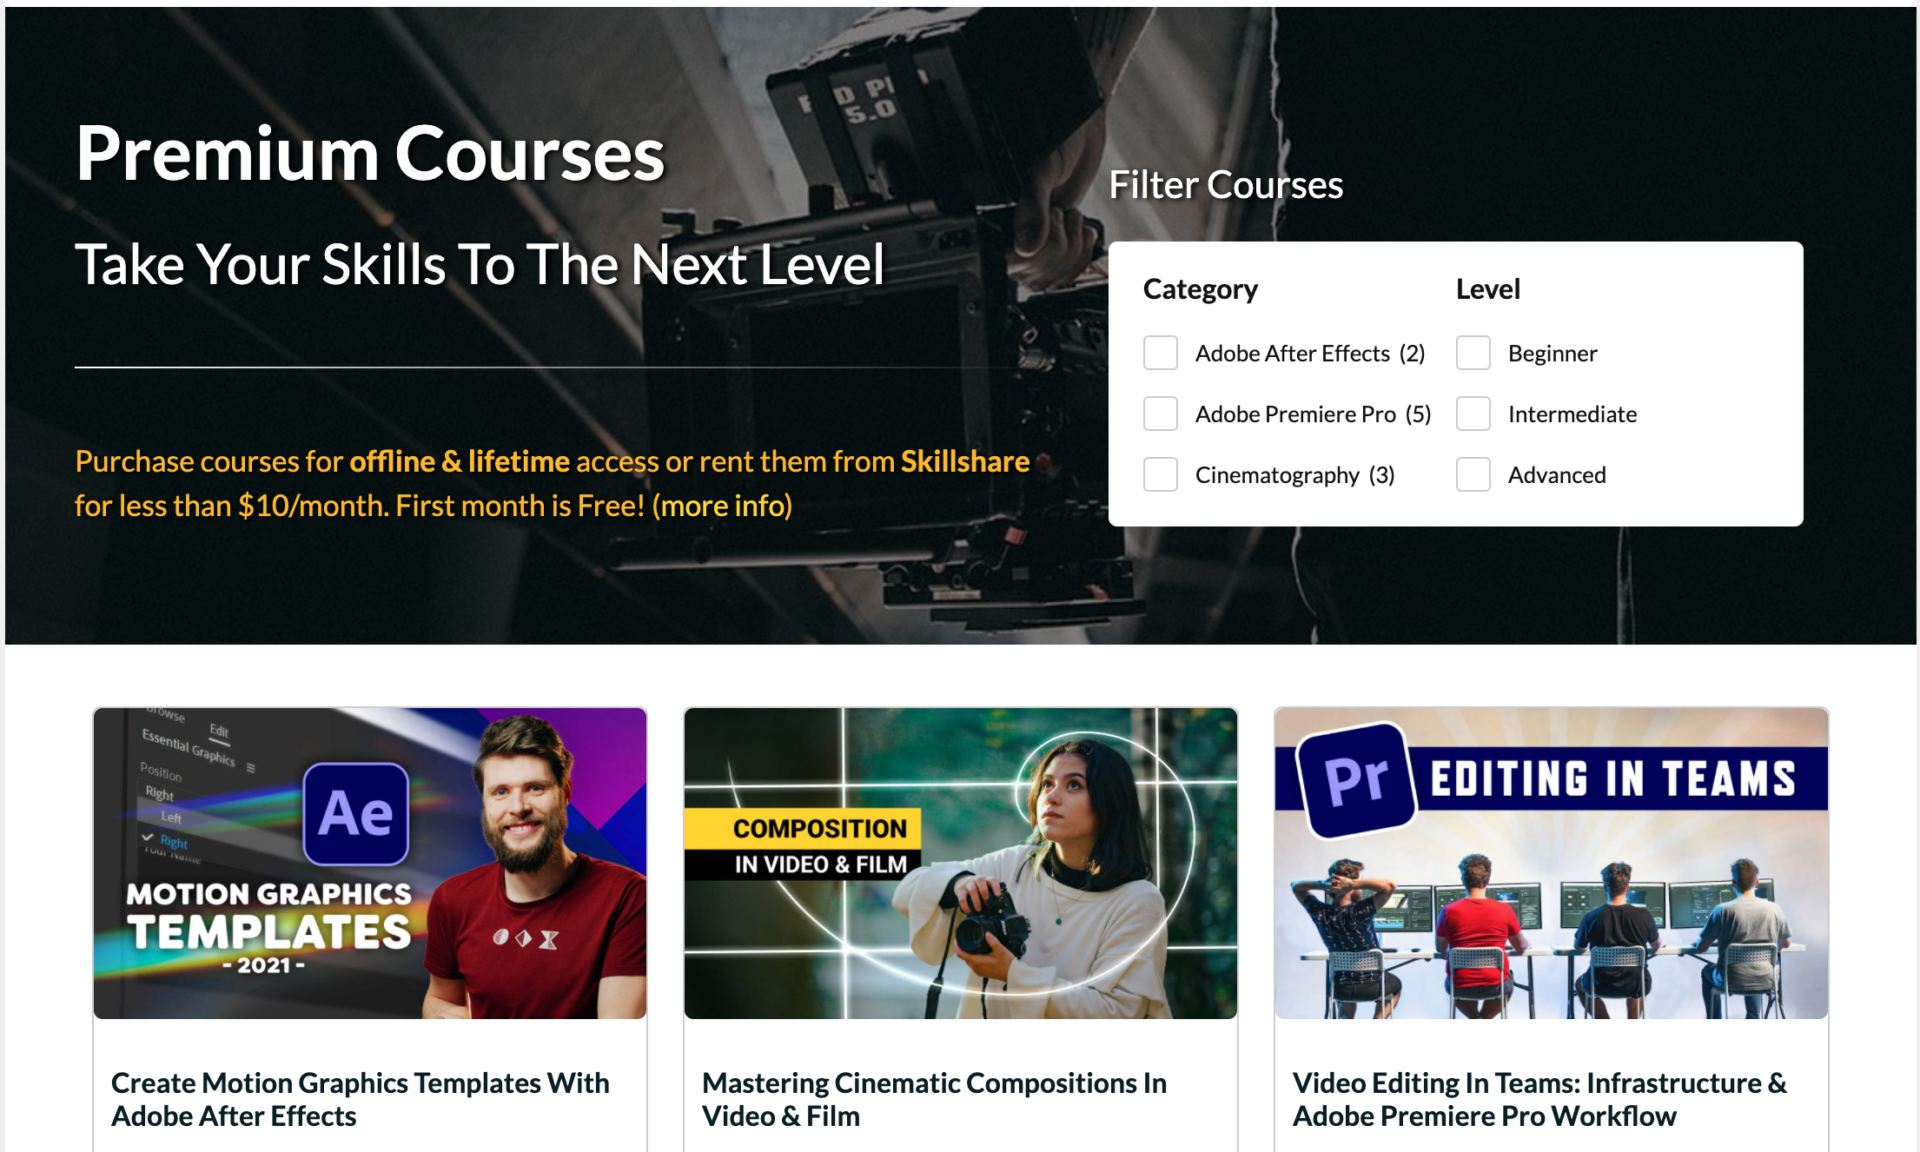 Screengrab of Top Teacher Jordy Vandeput’s website, where he talks about the current teacher referral offer of a free 1-month trial. Image source: Cinecom